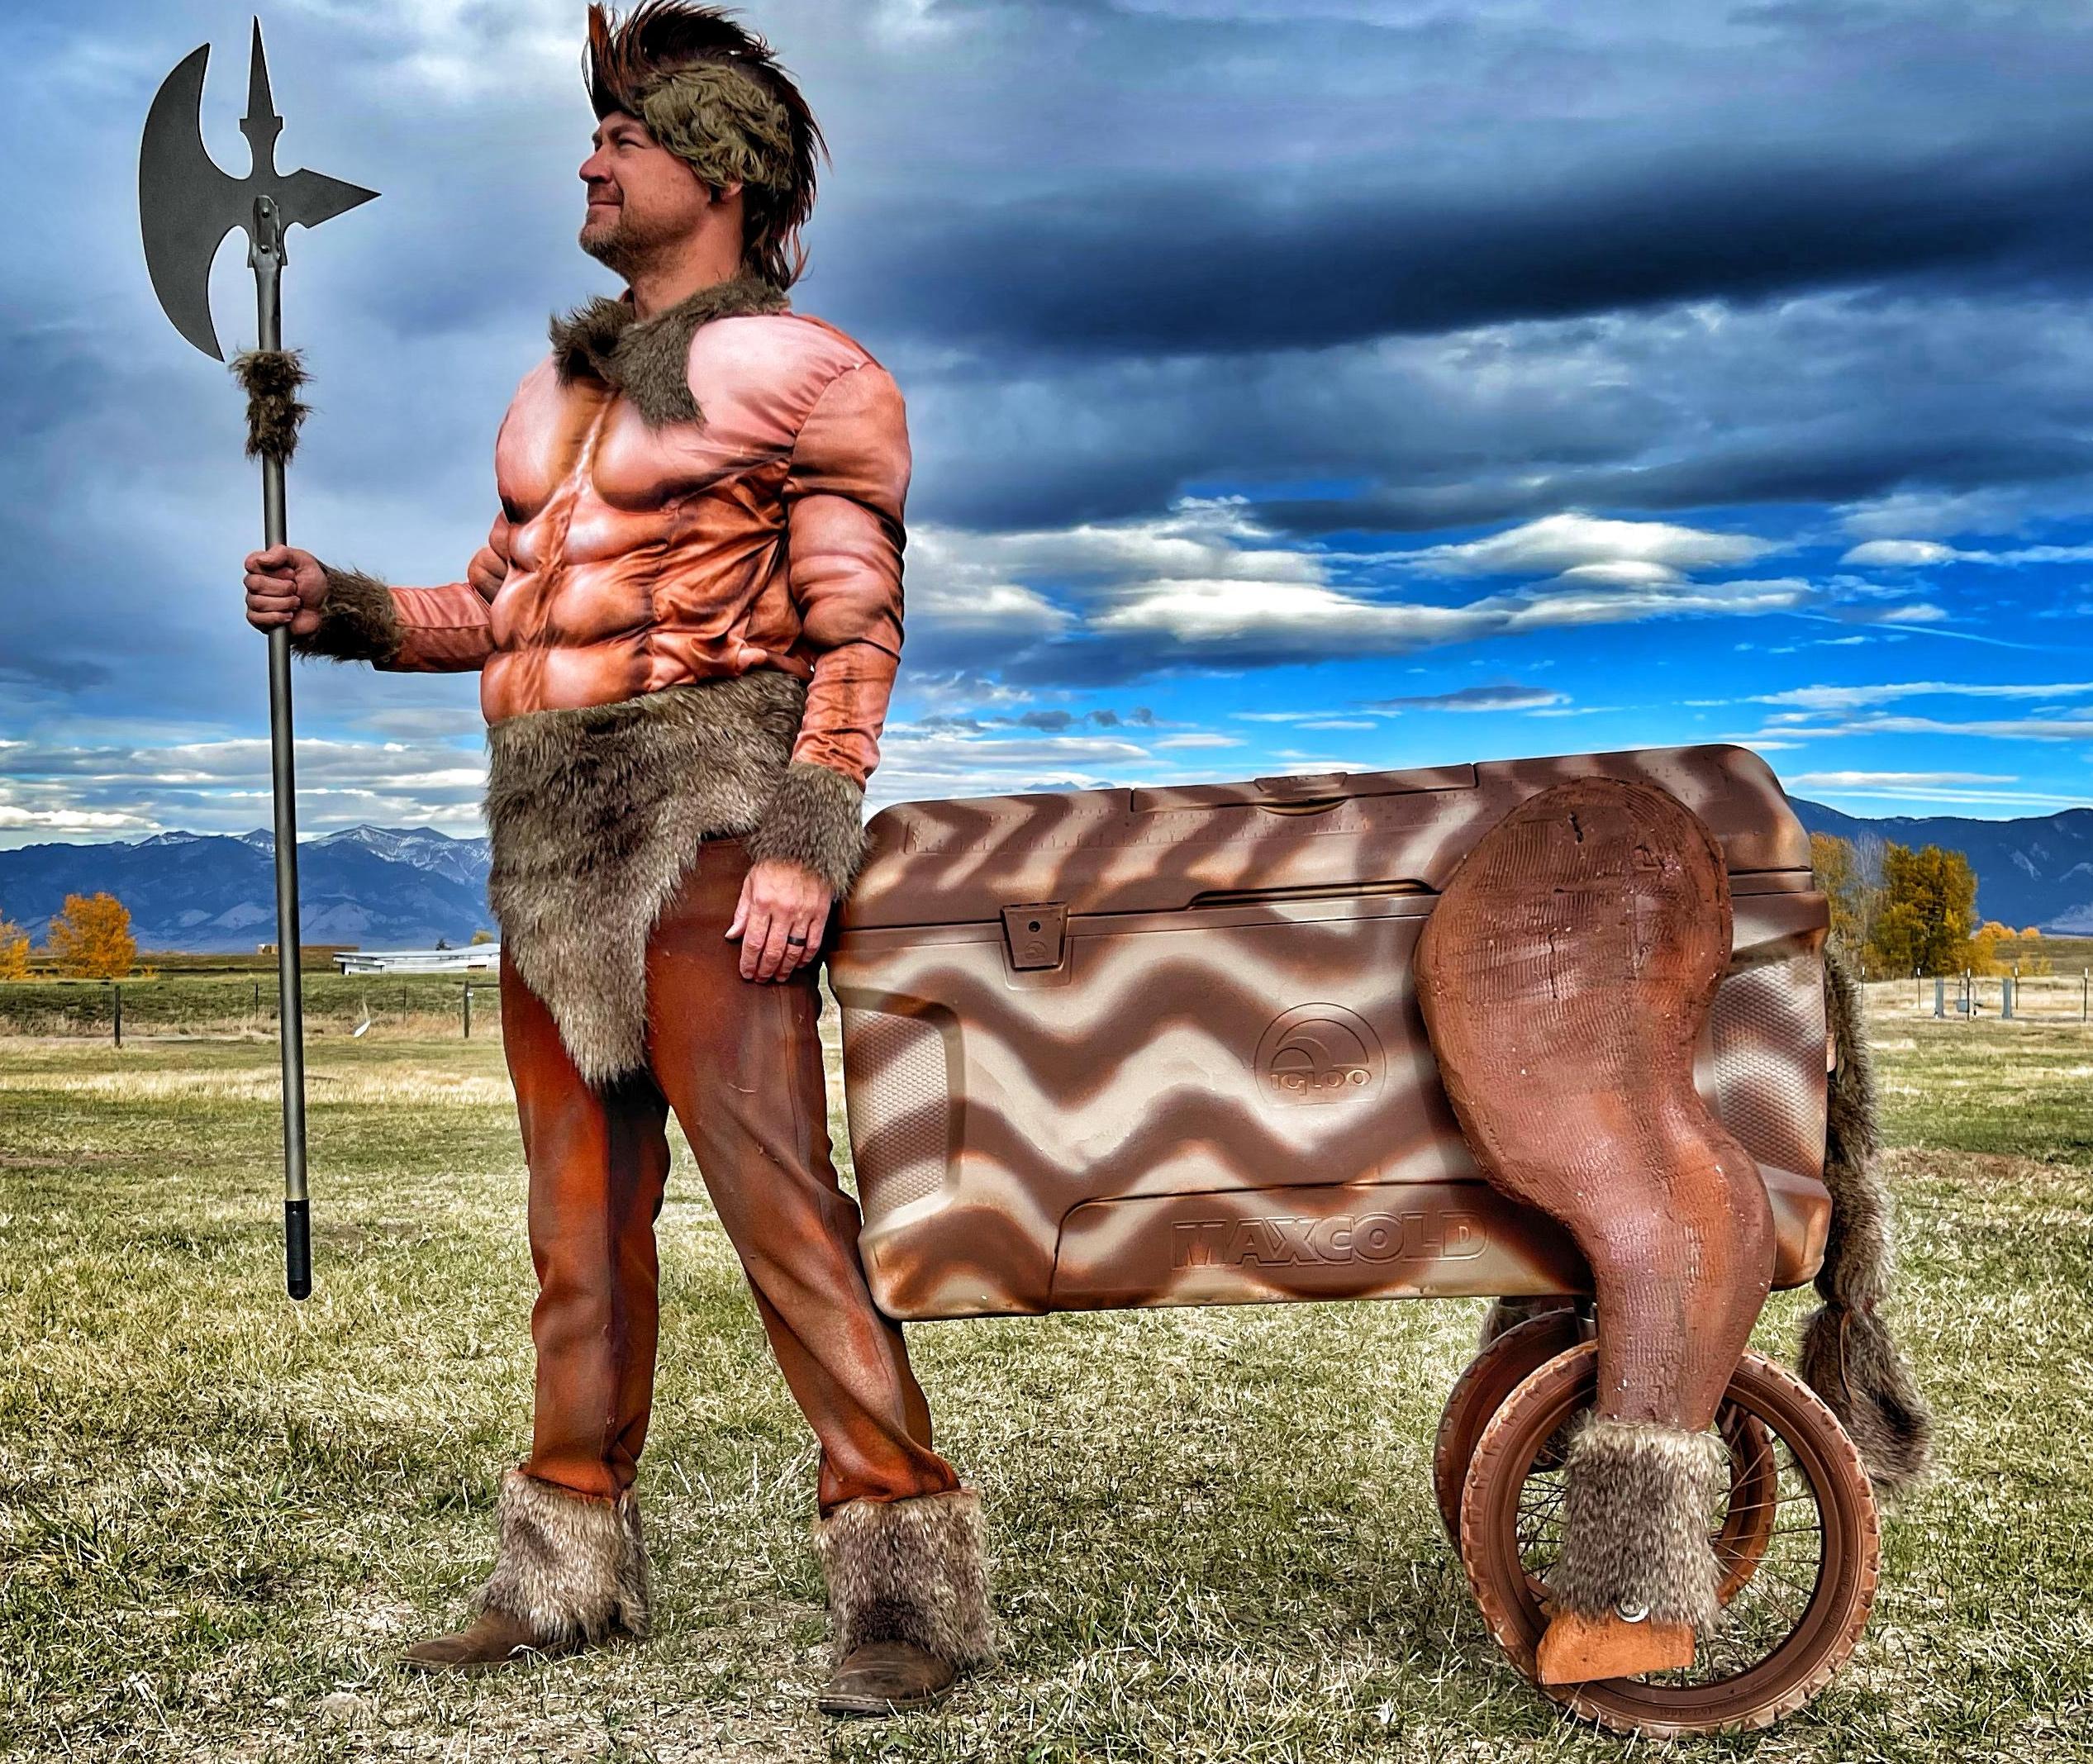 Centaur Costume With Walking Legs and Cooler From Unicorn City and Battle Axe